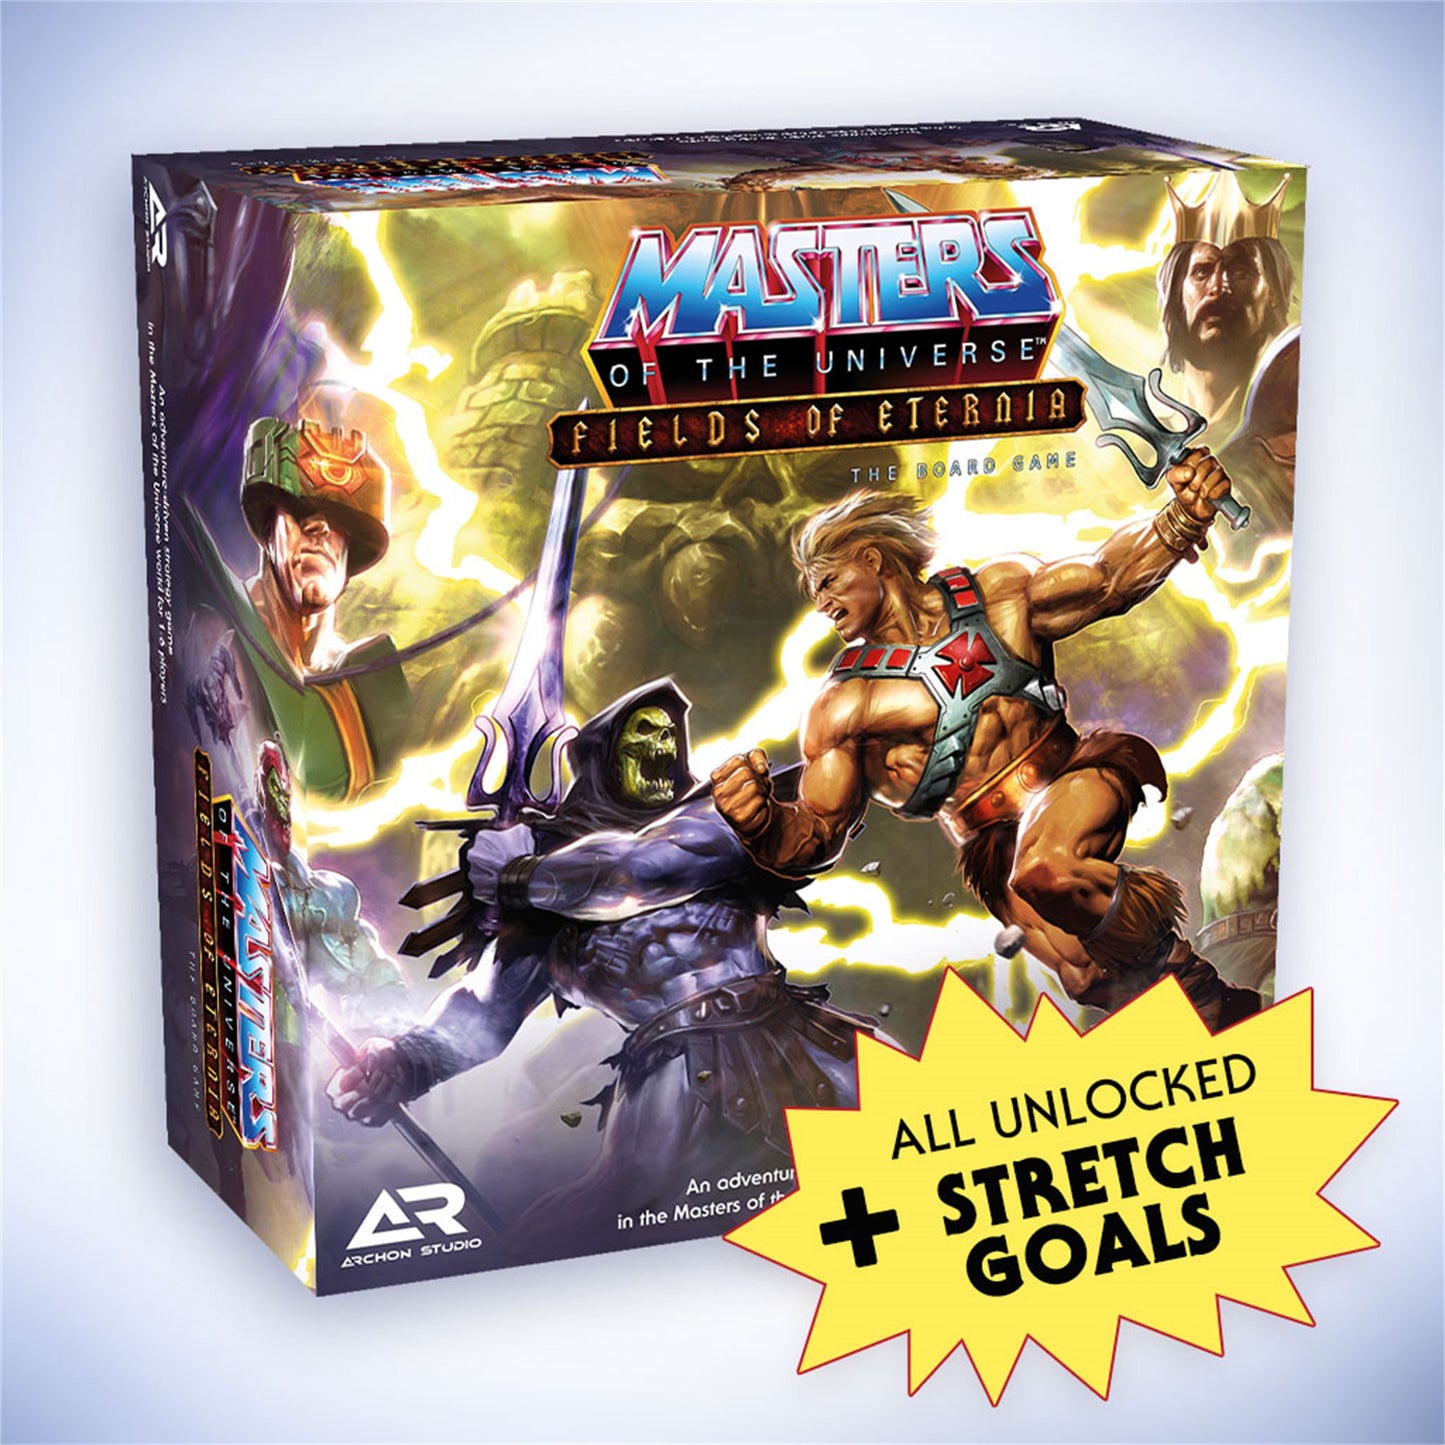 Masters of the Universe: Fields of Eternia Collectors Pledge English Kickstarter Edition + Stretchgoals + KS Exclusives